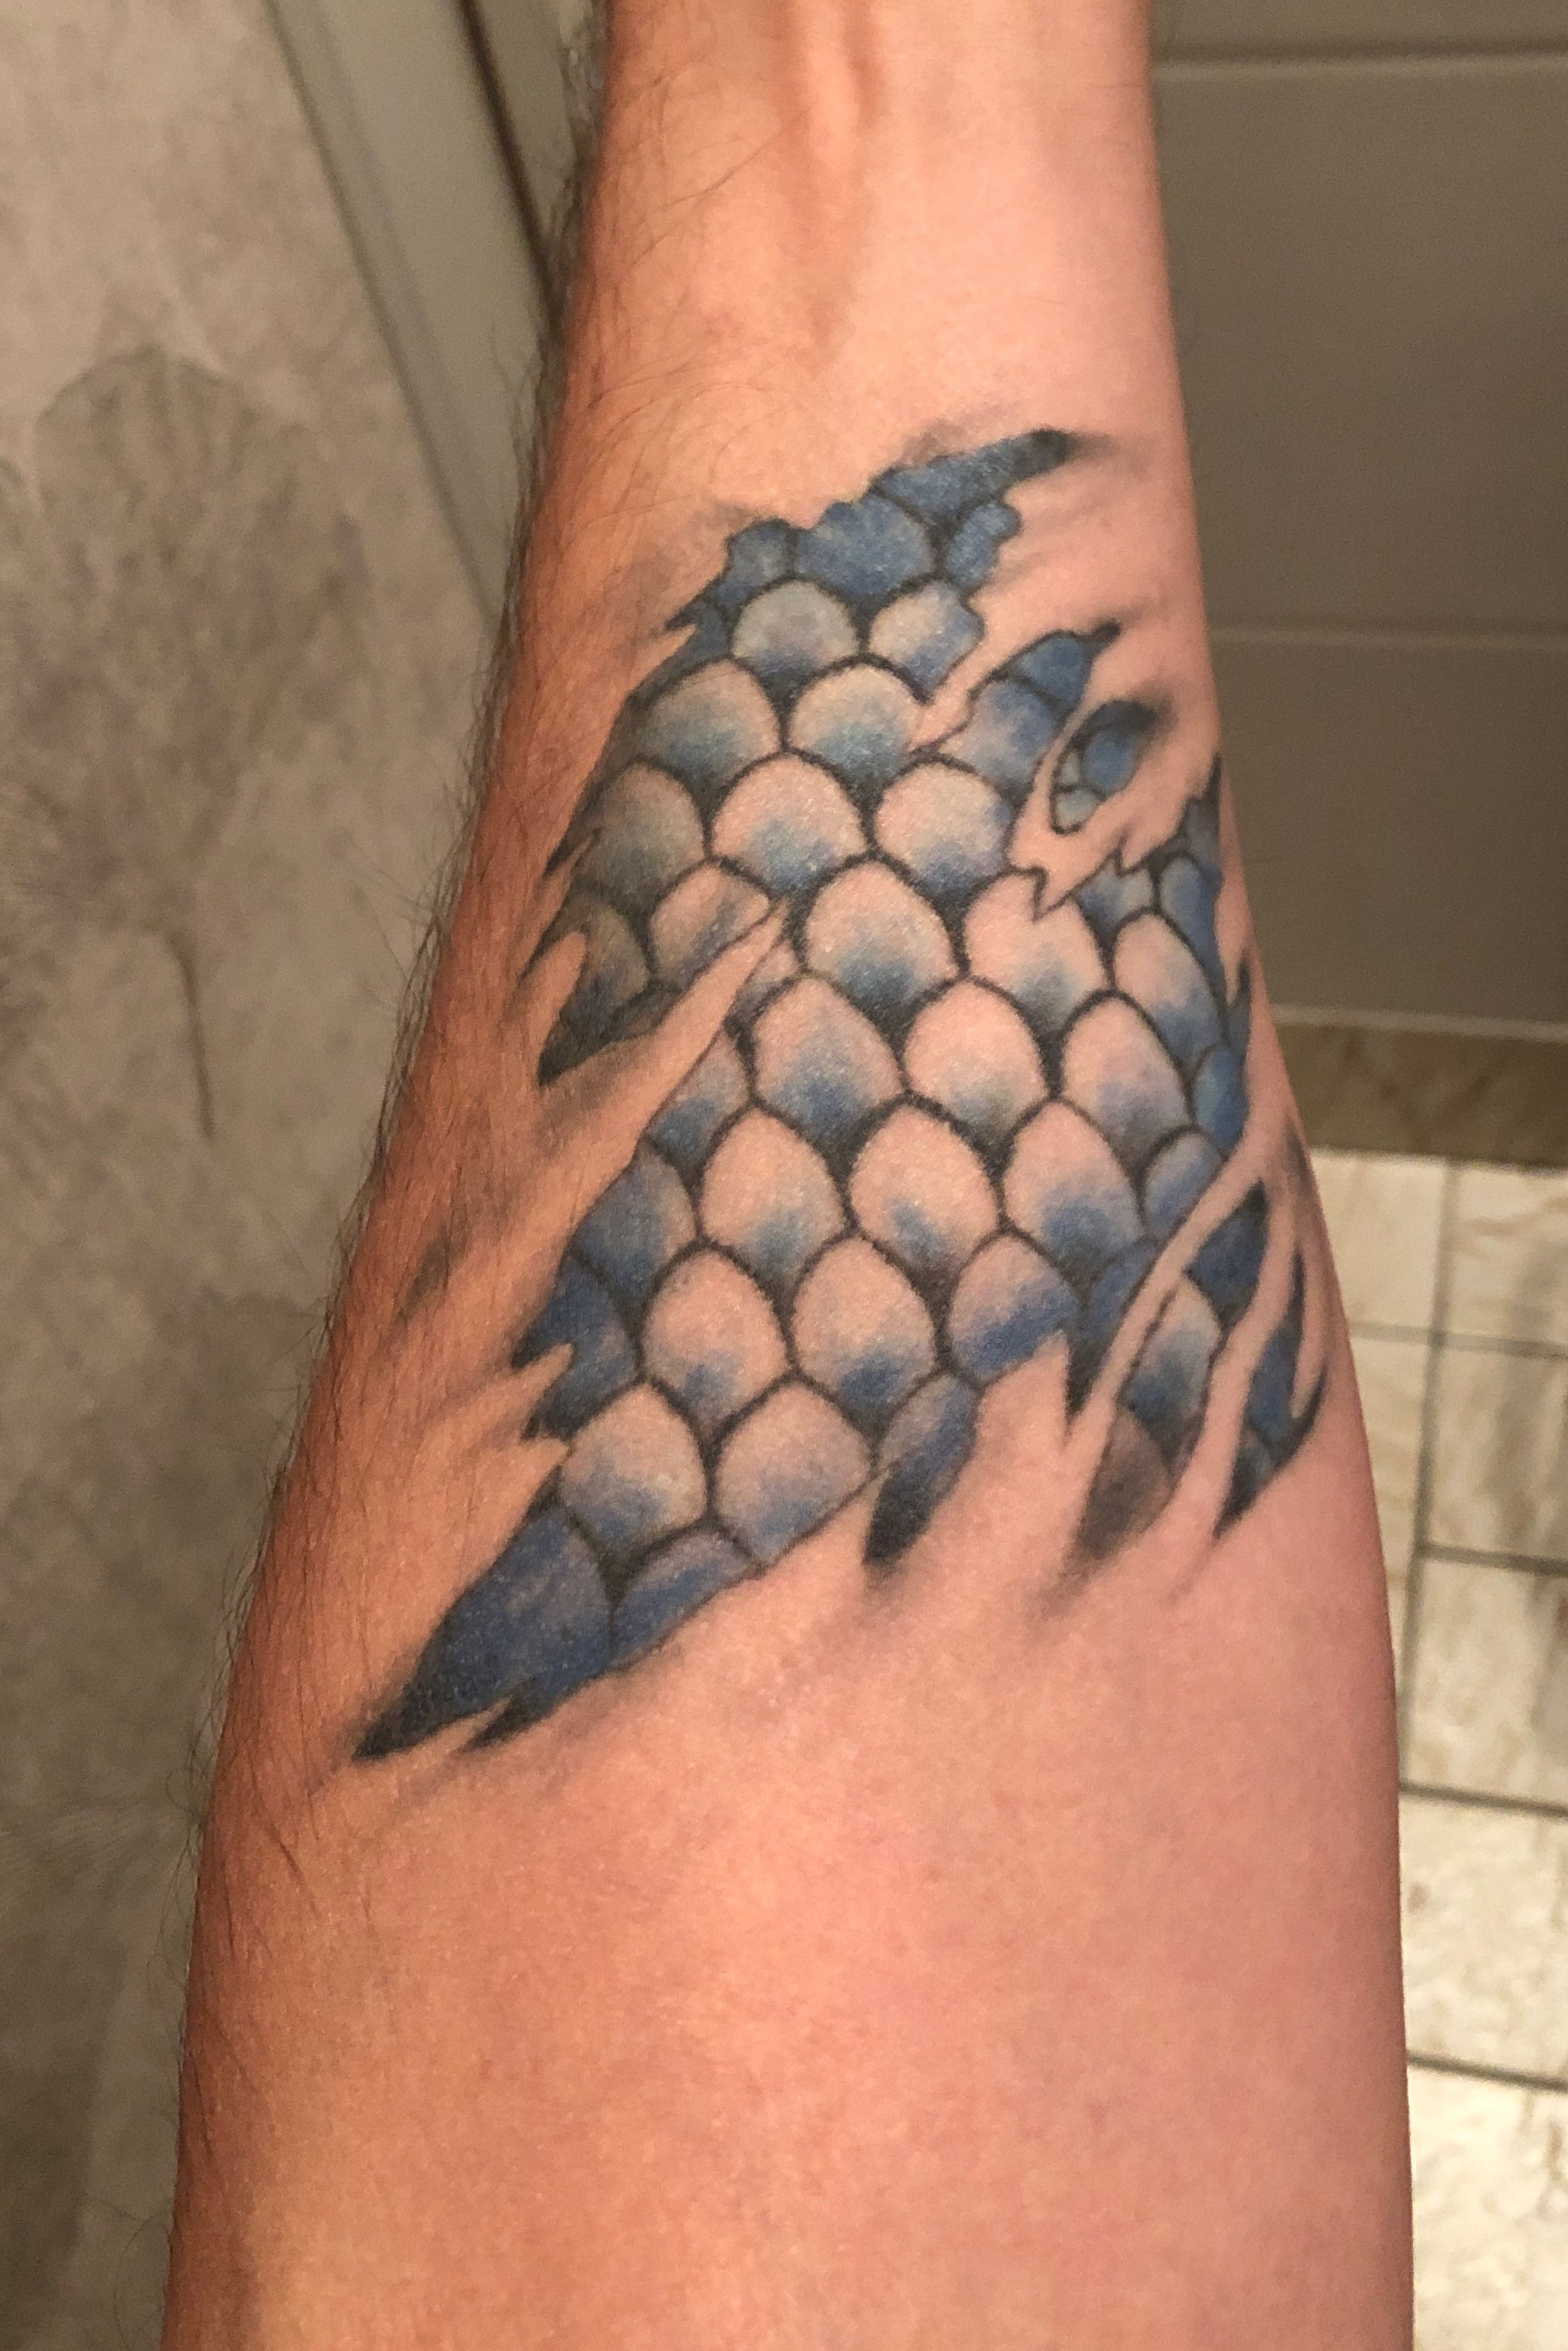 Fish scales tattoo hogfish mangosnapper spearfishing spearfisherman  saltlife tattoo tattoos chicagocustomtattoo luckysupply solidink   By Chicago Custom Tattoo  Facebook